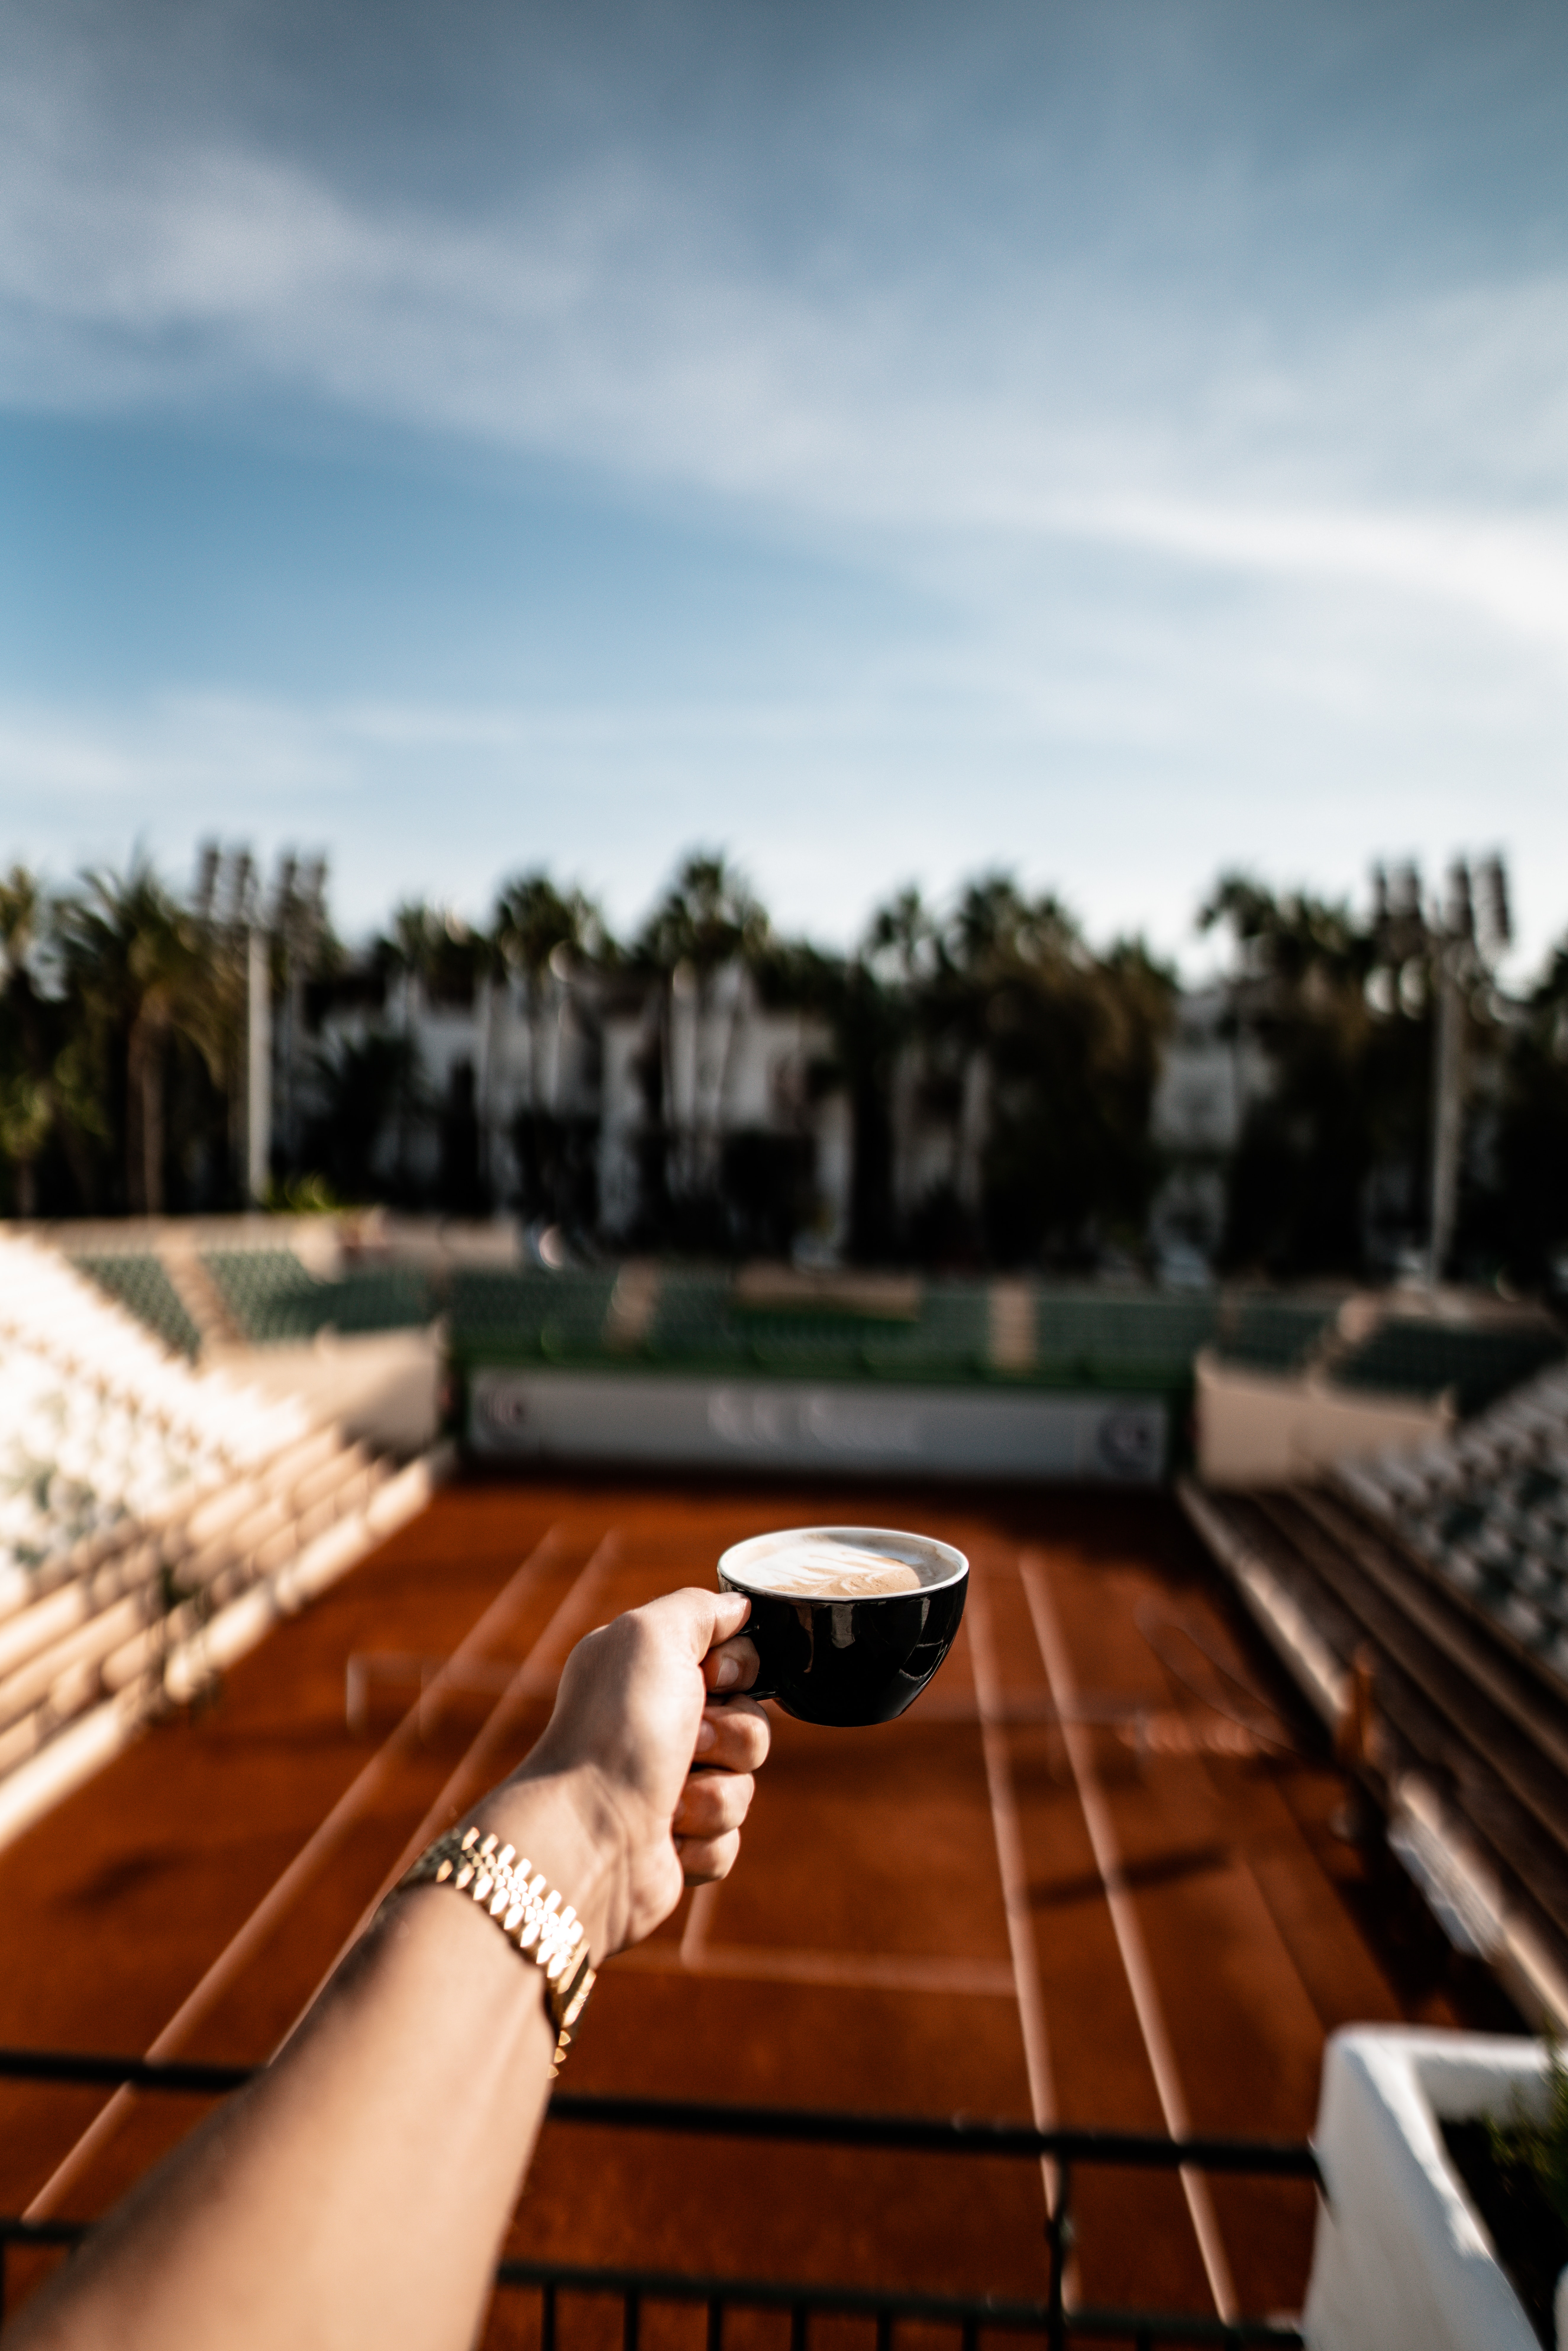 miscellanea, coffee, hand, miscellaneous, cup, tennis court Panoramic Wallpaper